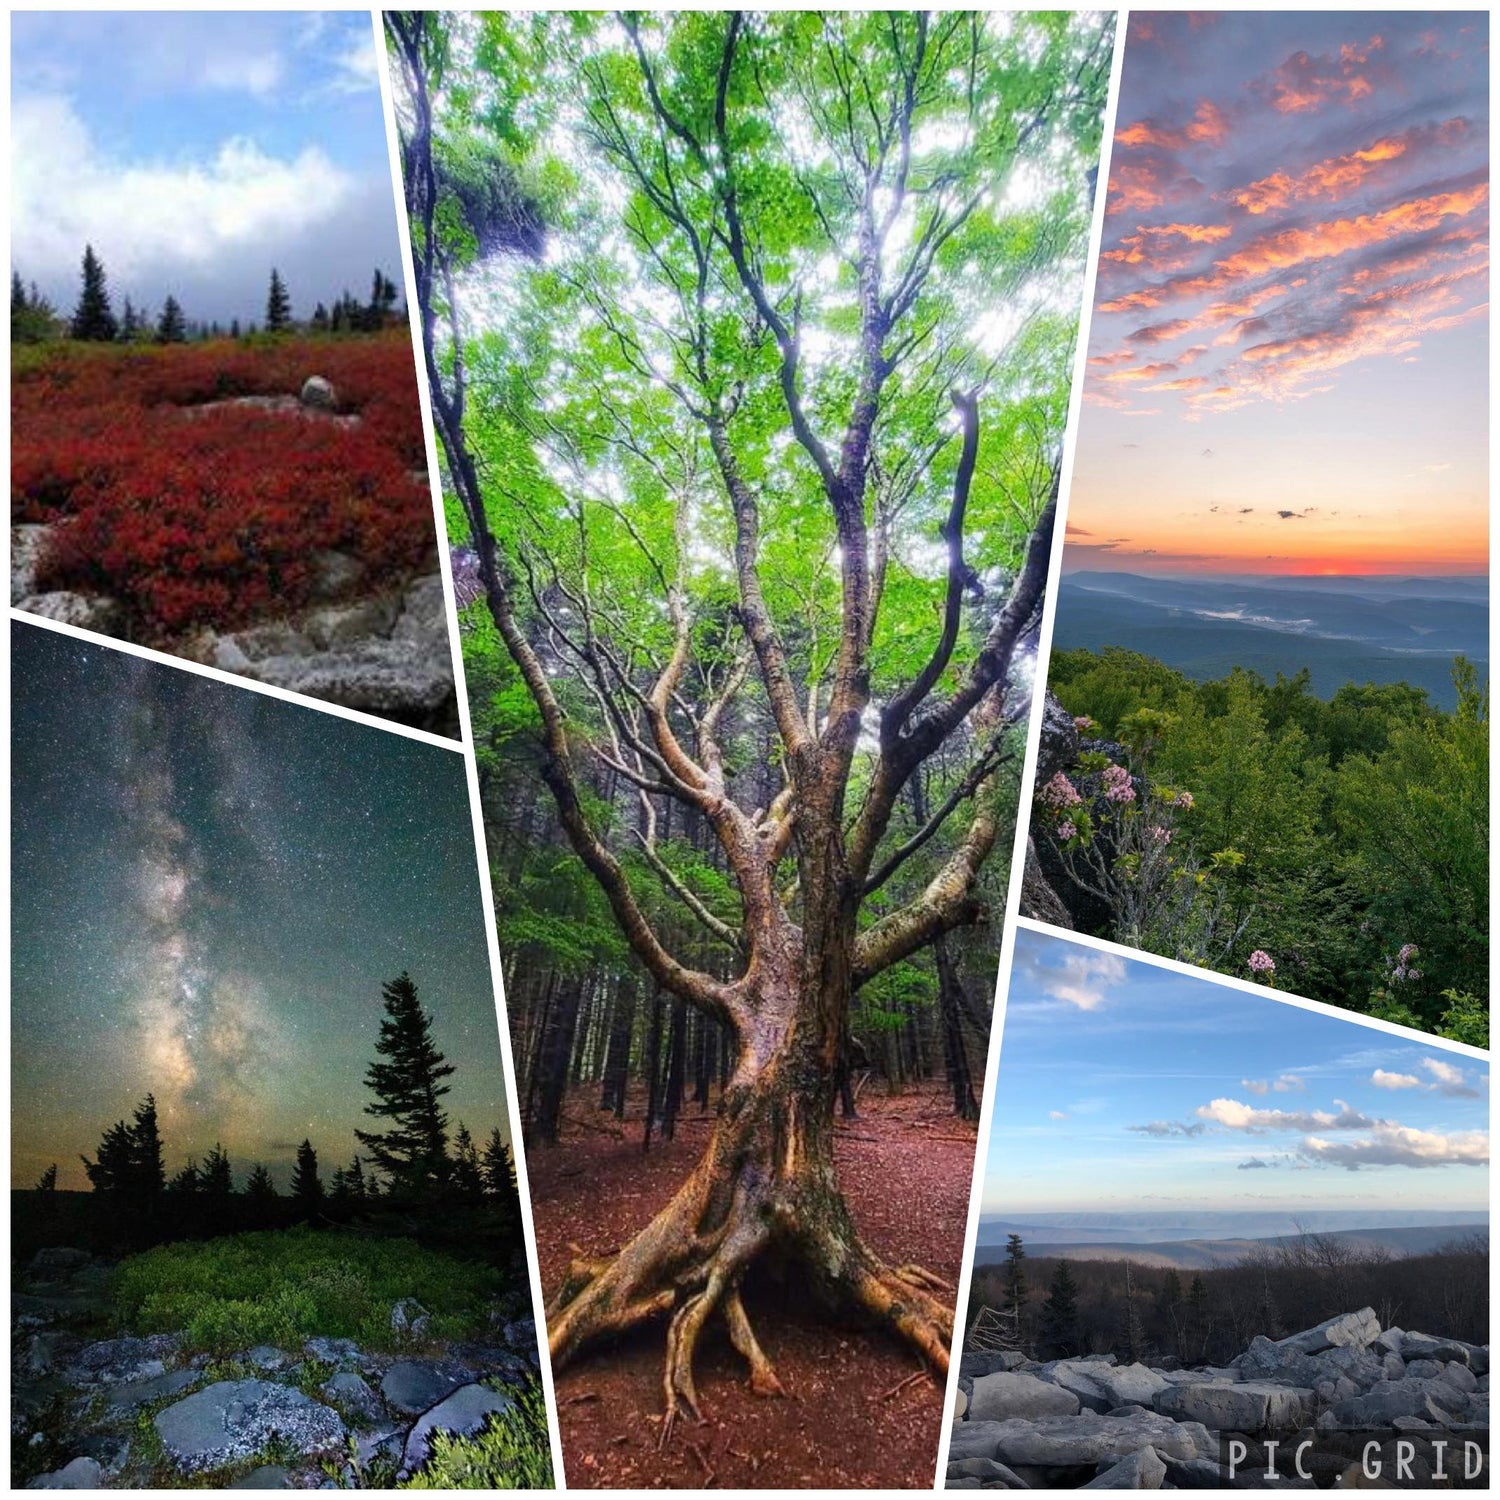 Dolly Sods is a favorite!  Beautiful landscape and the best nature has to offer.  Many hiking trails, fishing, relaxing and many photo ops while at our vacation rentals rustic cabin lodging in Seneca Rocks